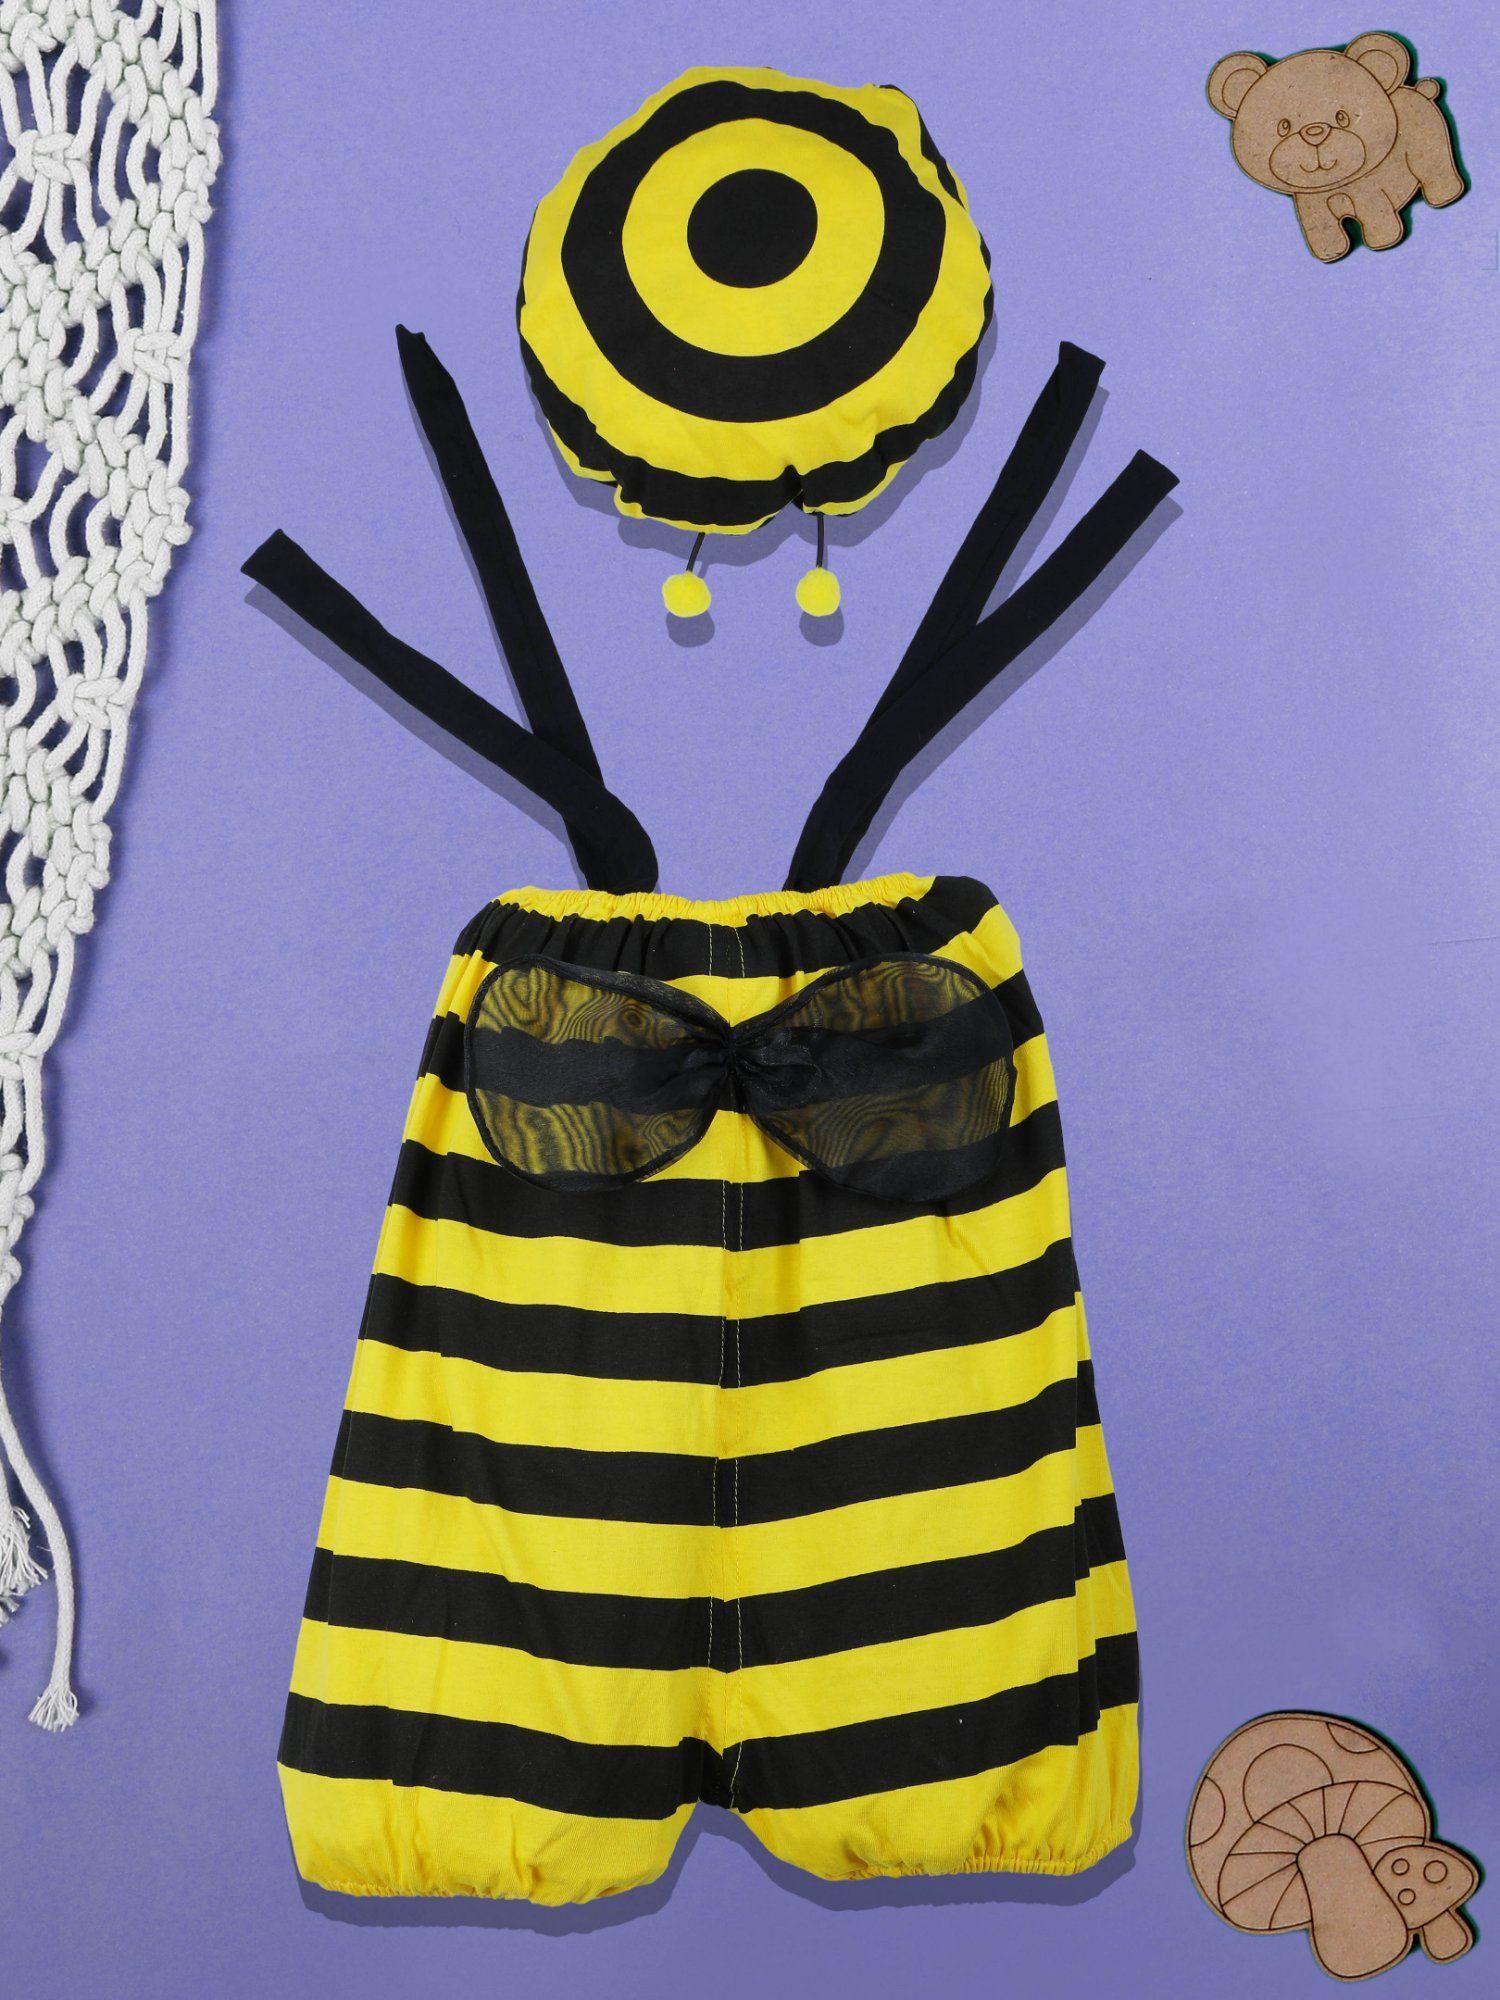 bumble bee costume cap and fancy dress yellow (set of 2)